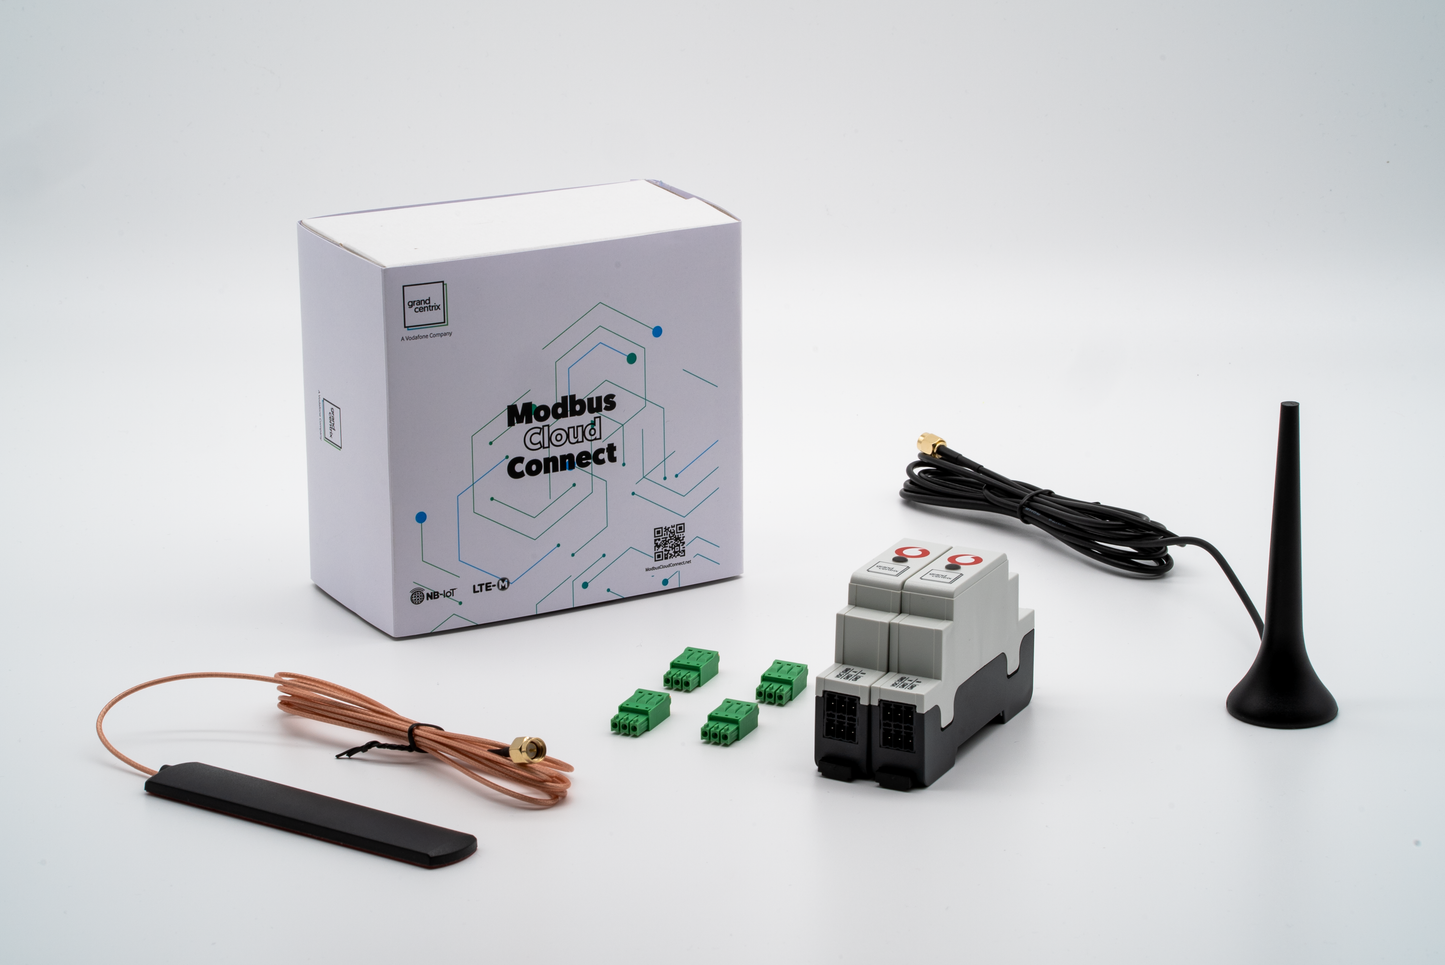 Modbus Cloud Connect Trial Package